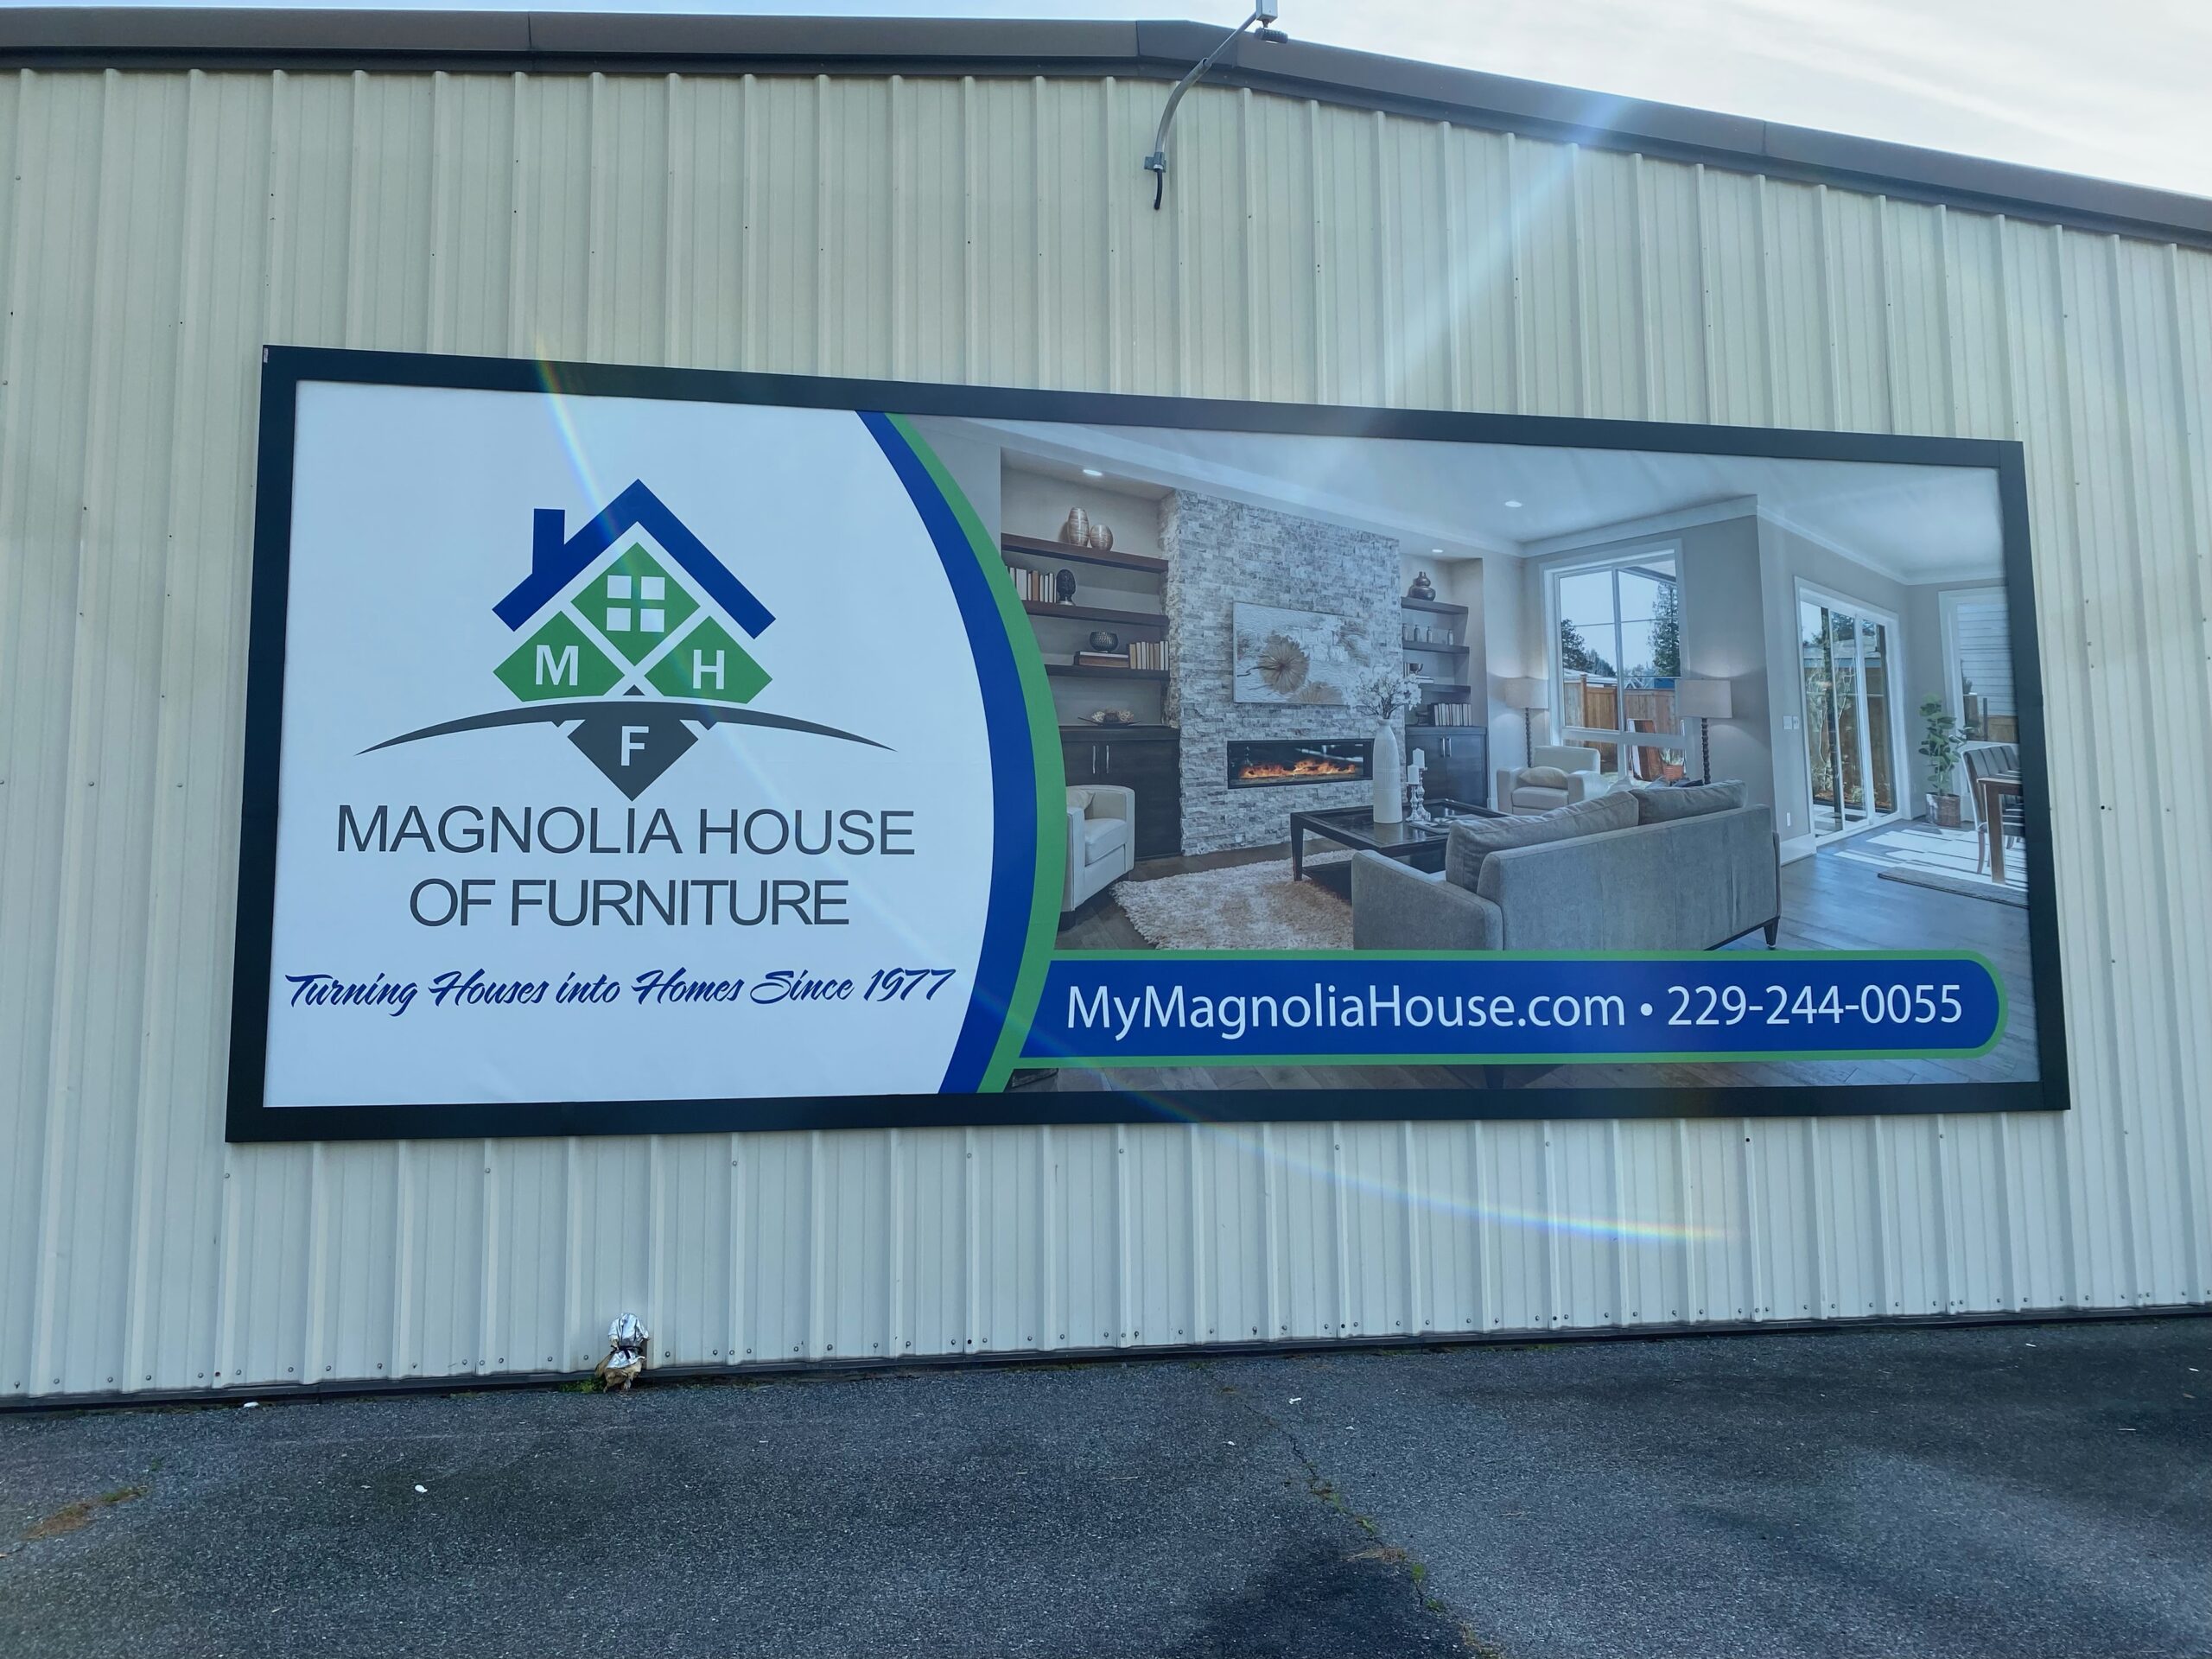 25-x-10-bannerframe-classic-lind-signspring-covers-soga-graphics-adel-ga-front-view-scaled Wallscape of the Week: Turning Banners Into Business for Magnolia House of Furniture